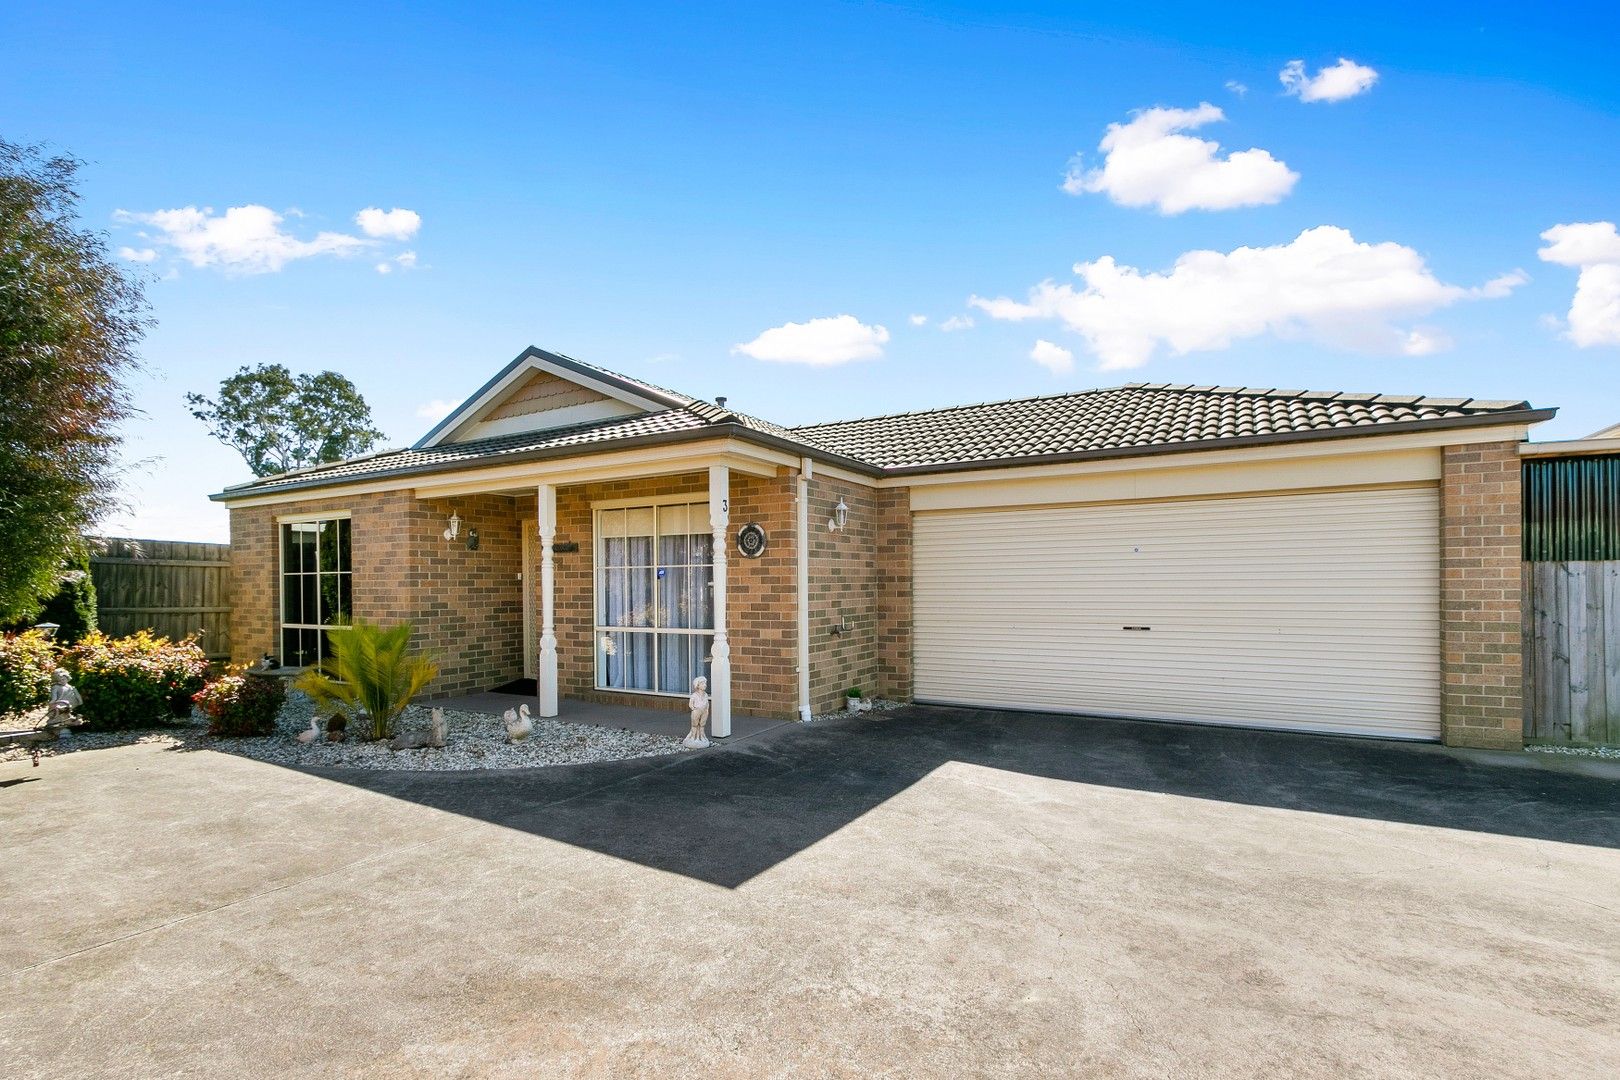 3 bedrooms Townhouse in 3/9 Grammar Drive TRARALGON VIC, 3844